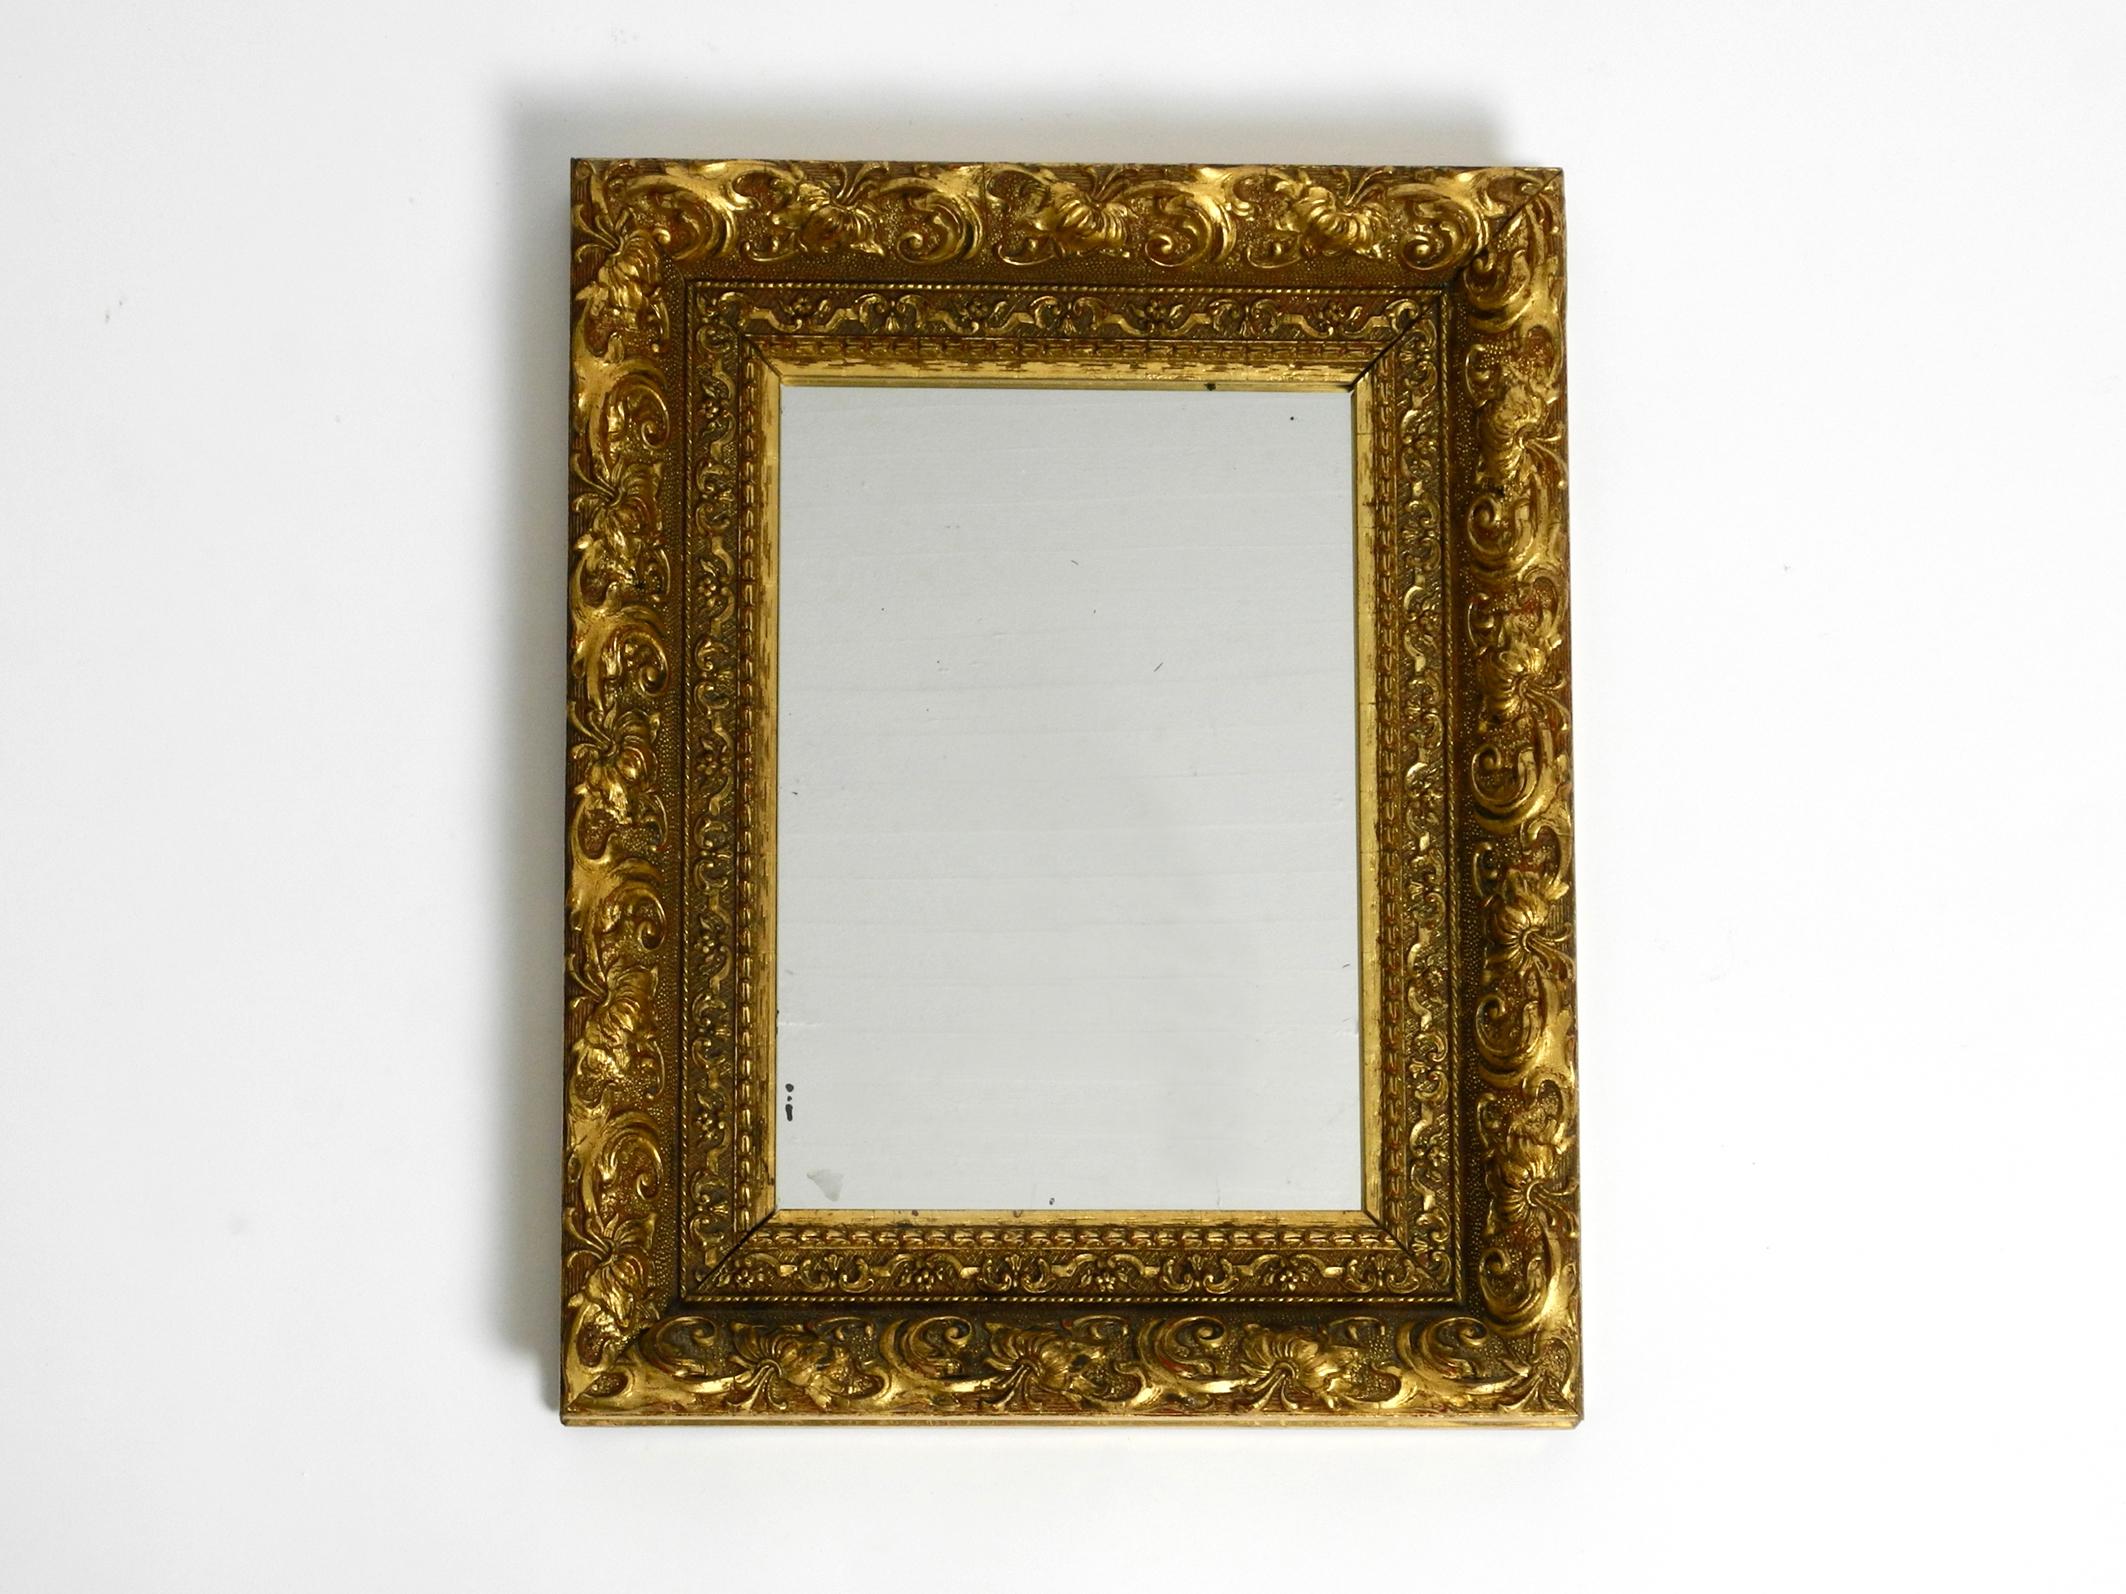 Beautiful rare Mid Century wall mirror made of ornate solid wood.
The frame is completely gold-plated and has a wonderful patina.
Manufactured in Italy in the 1950s.
Original mirror glass with a few black spots, but not blind.
Without damages to